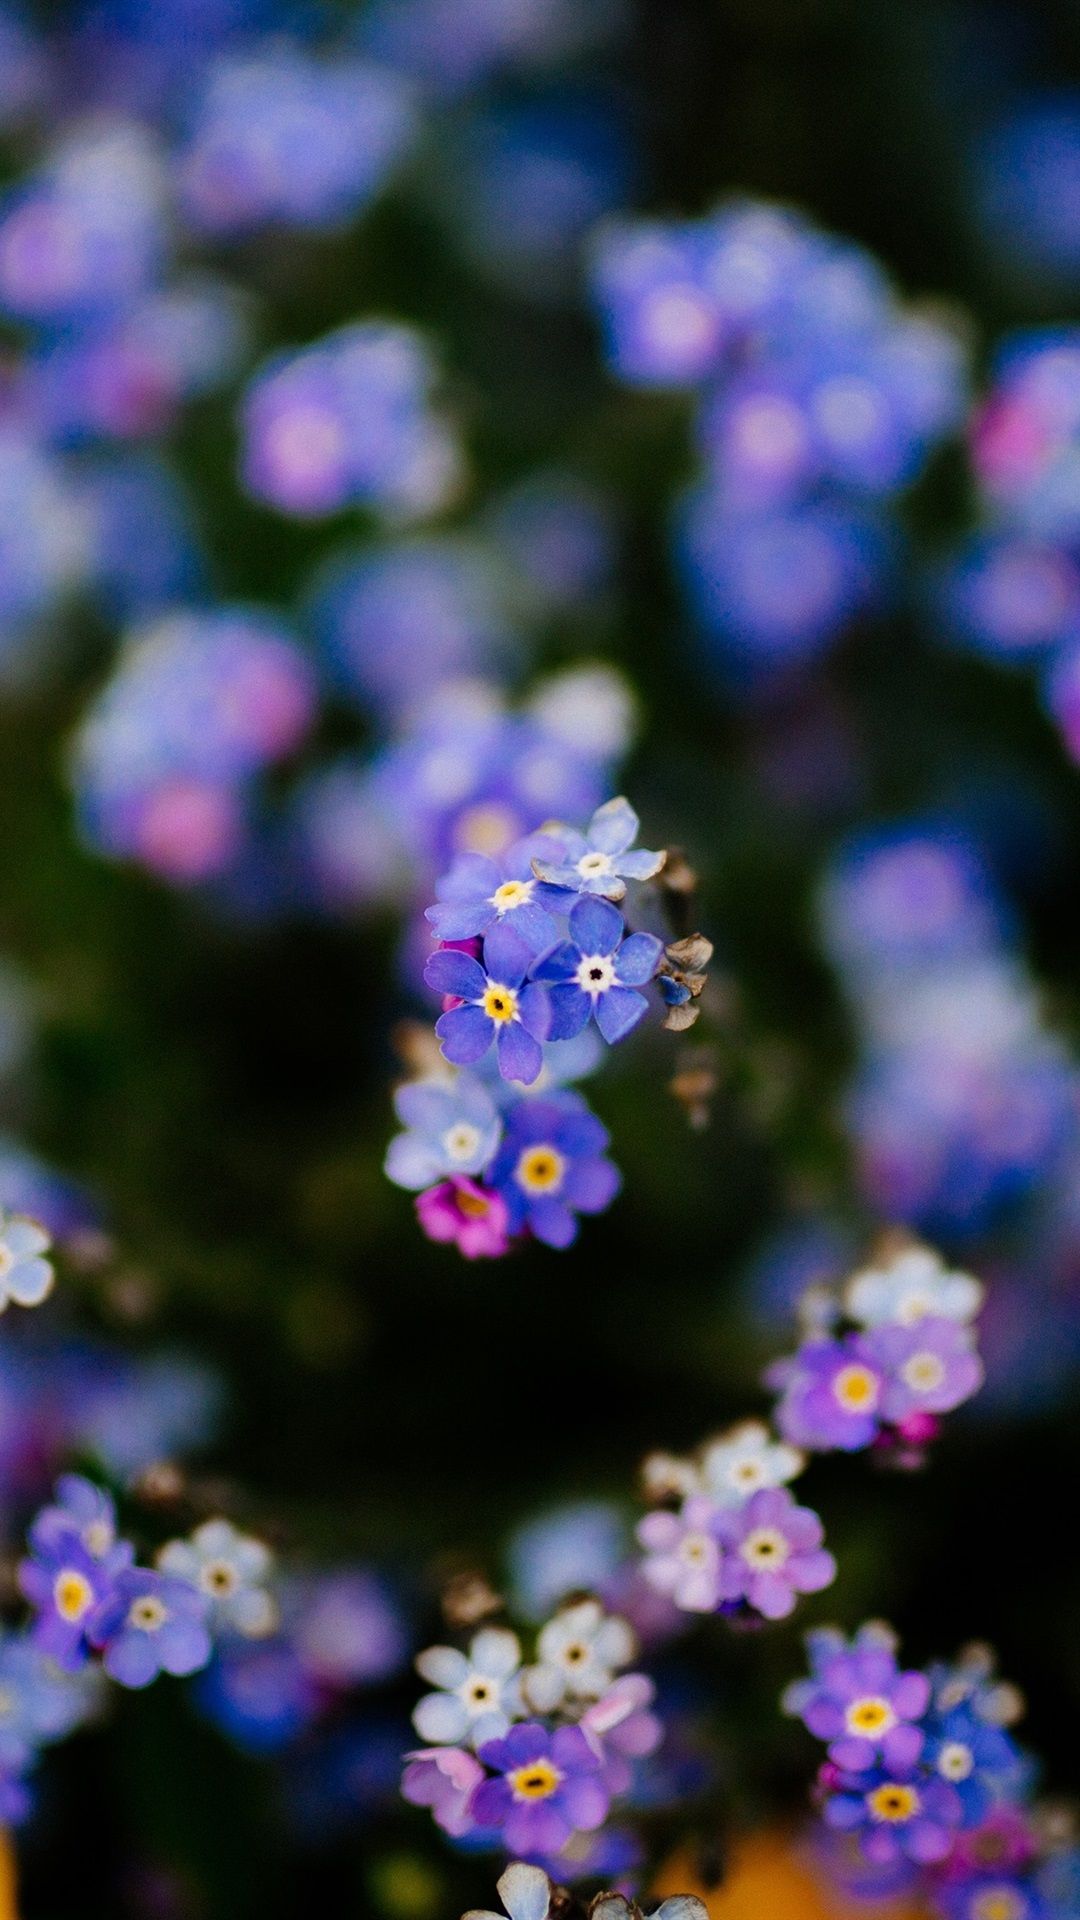 Forget Me Not Flowers Background, Blurry 1080x1920 IPhone 8 7 6 6S Plus Wallpaper, Background, Picture, Image